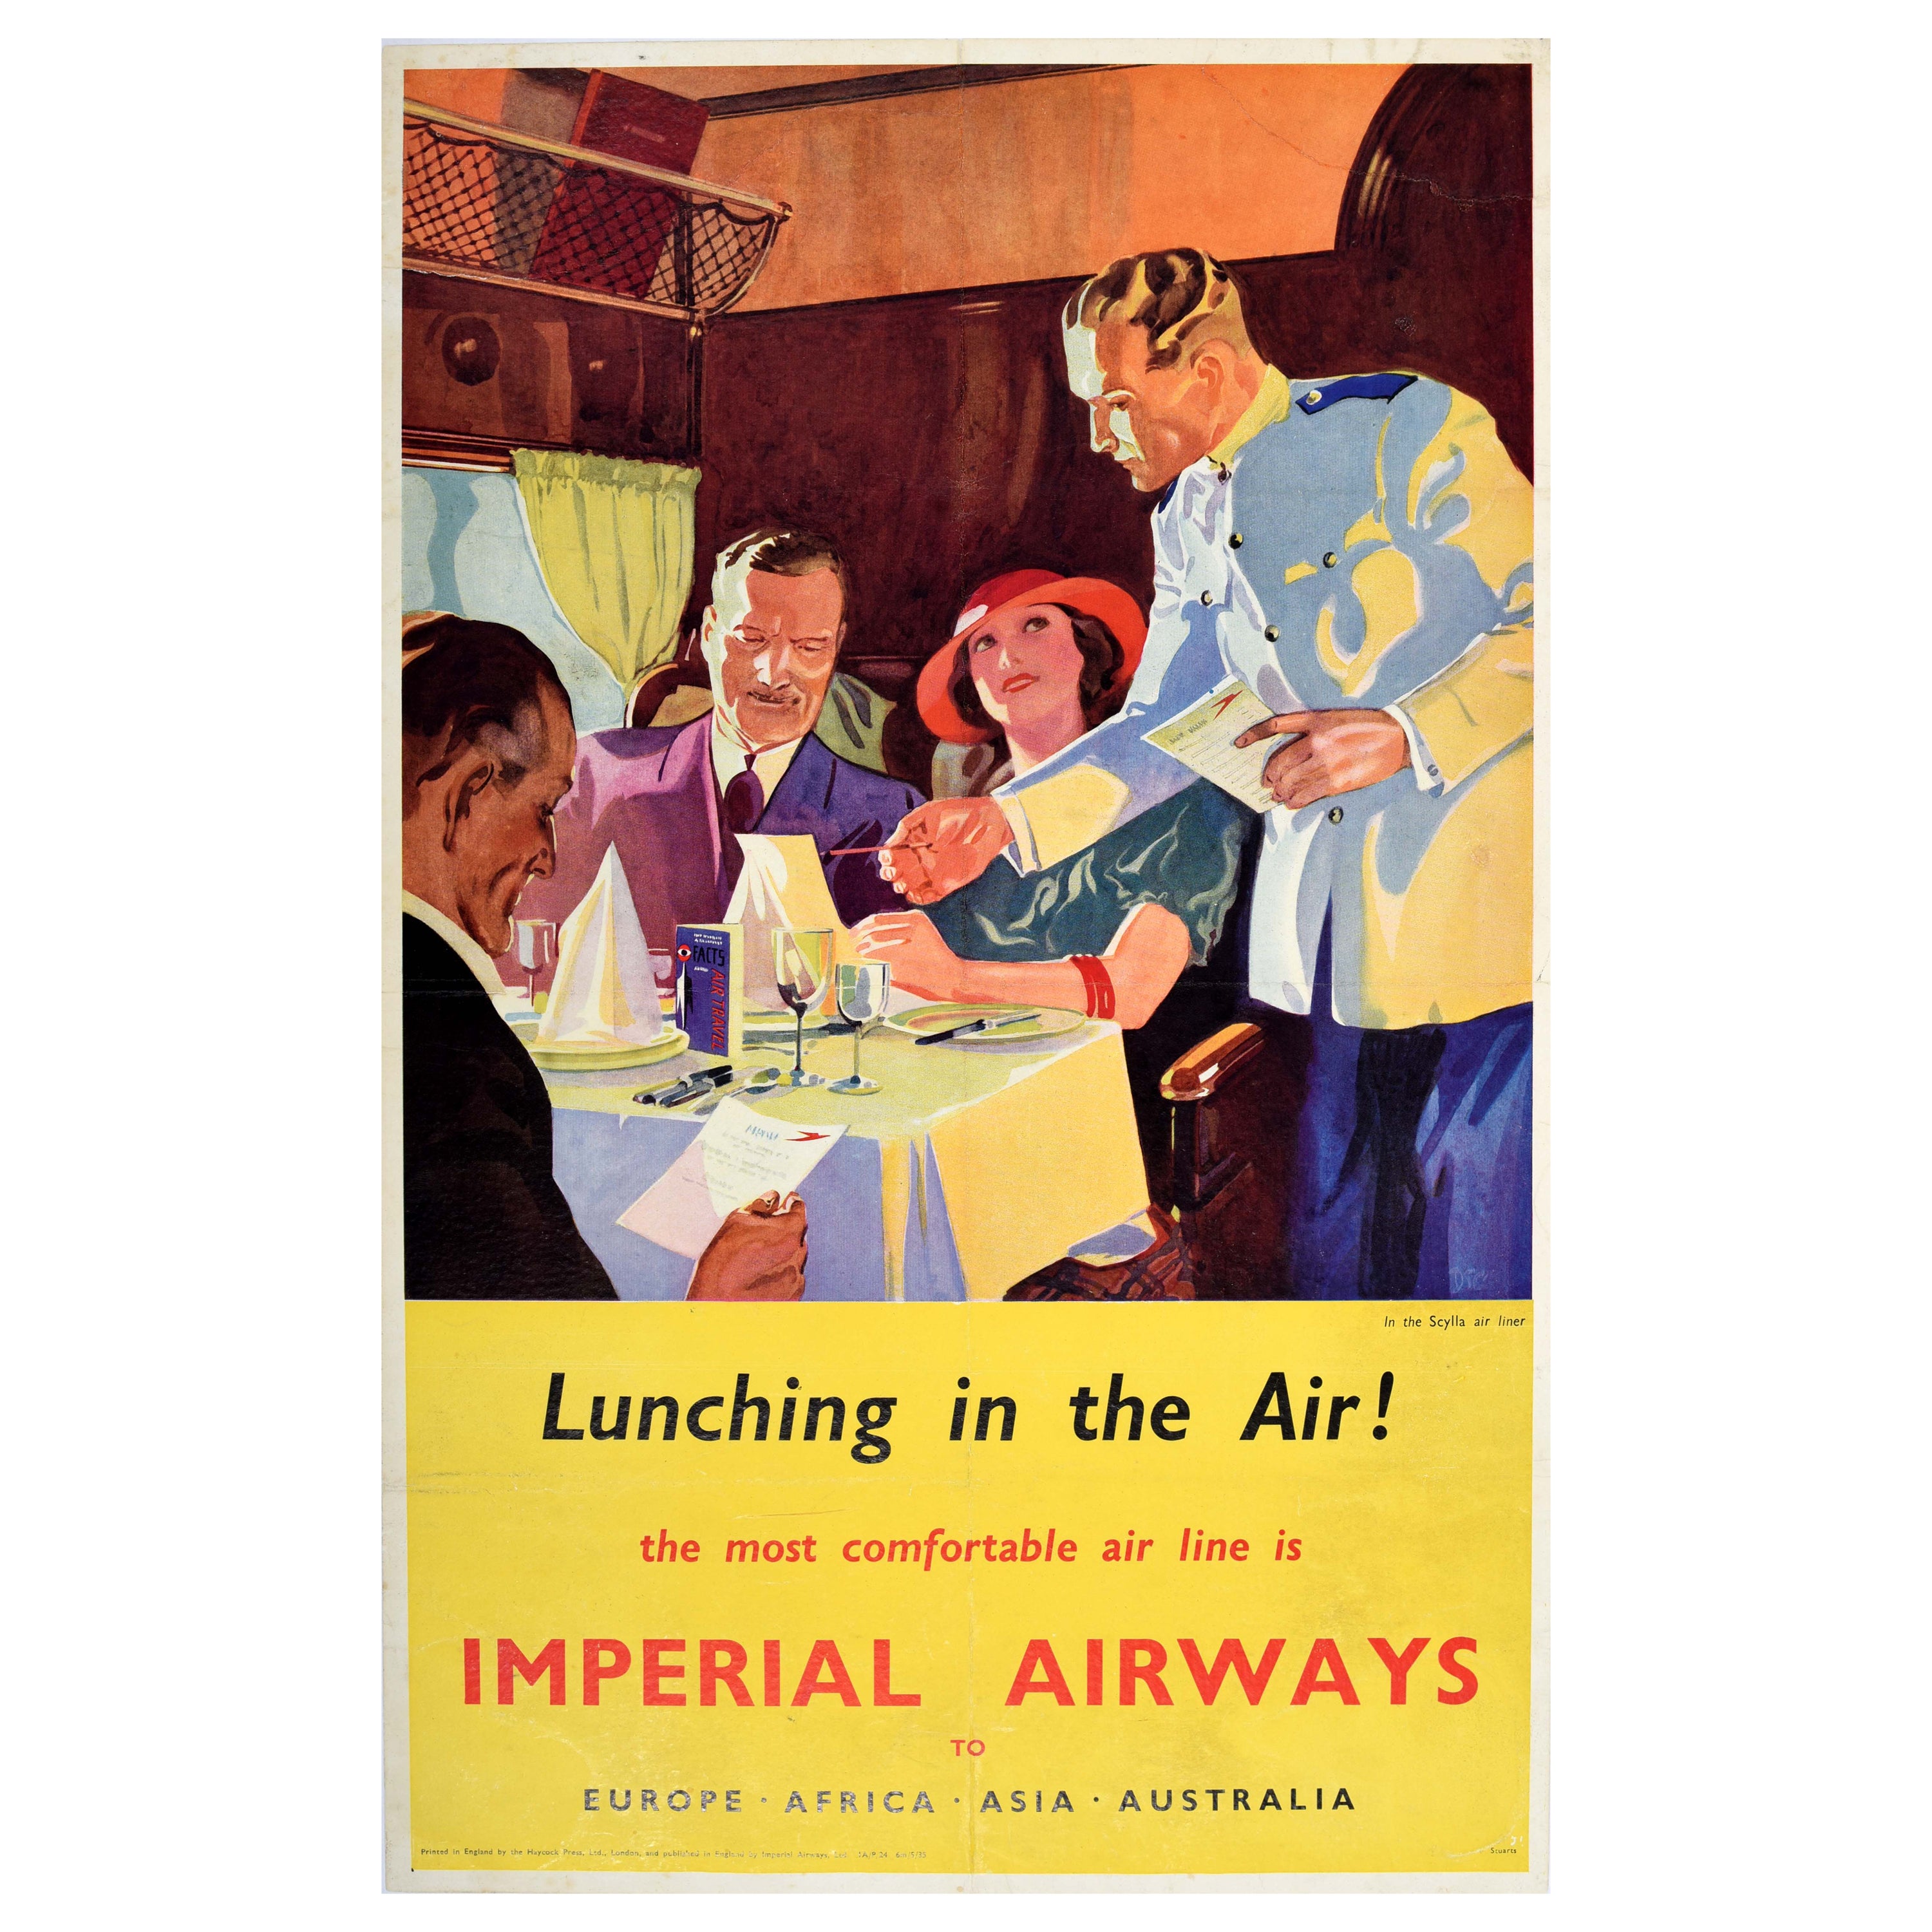 Original Vintage Travel Advertising Poster Imperial Airways Lunching In The Air For Sale